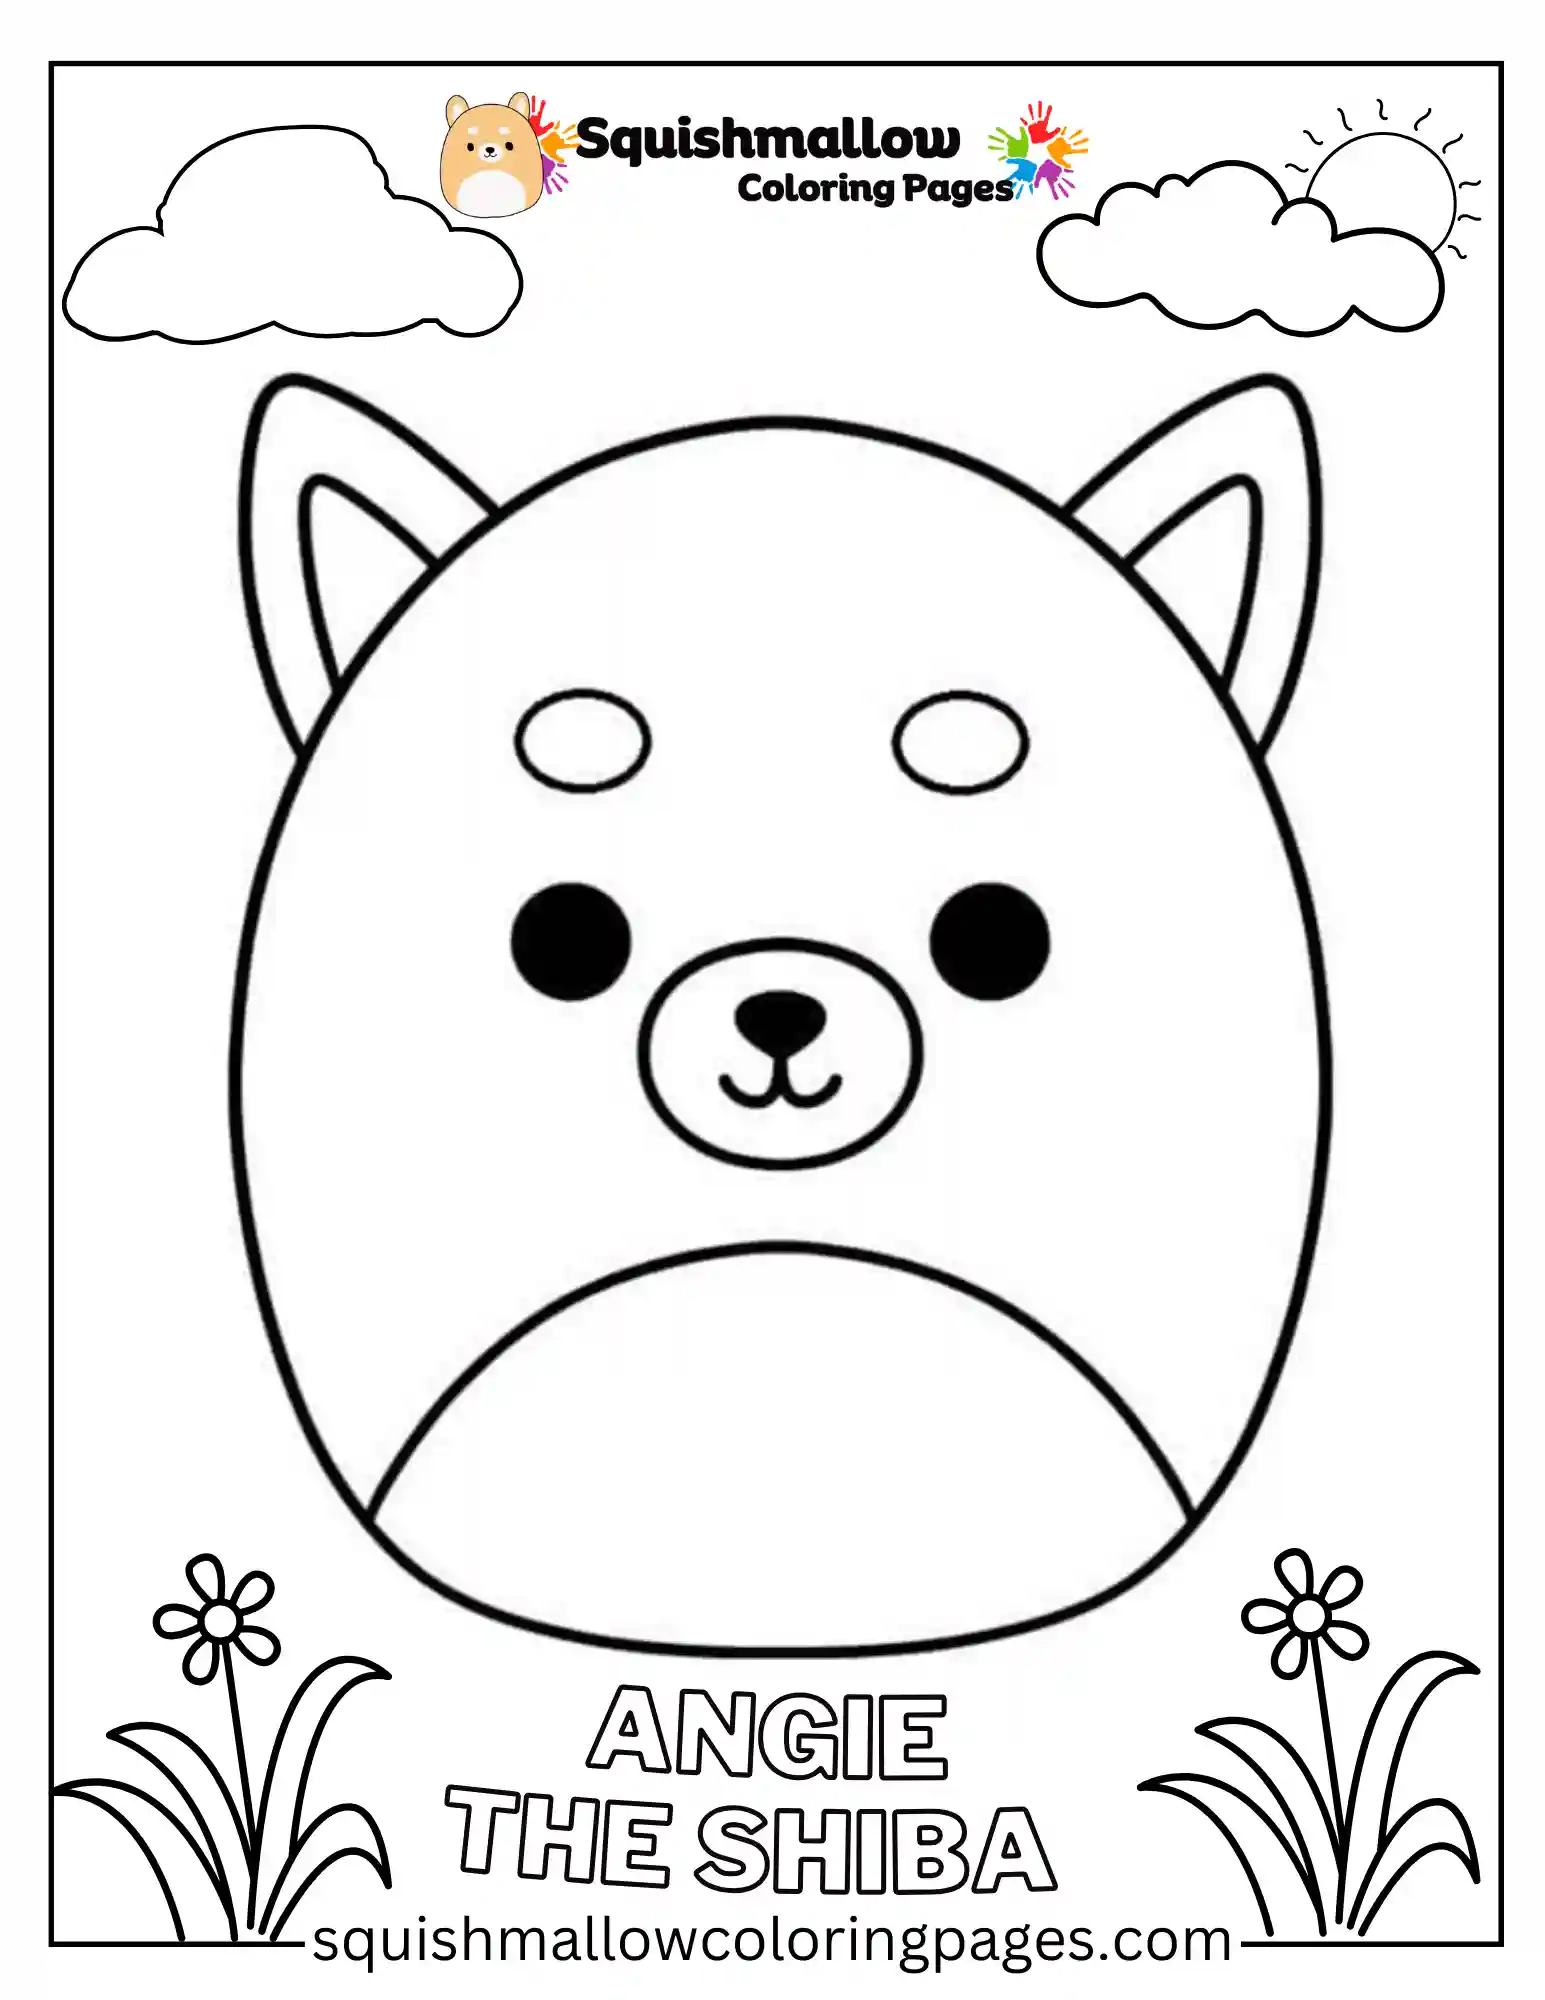 Angie The Shiba Squishmallow Coloring Pages